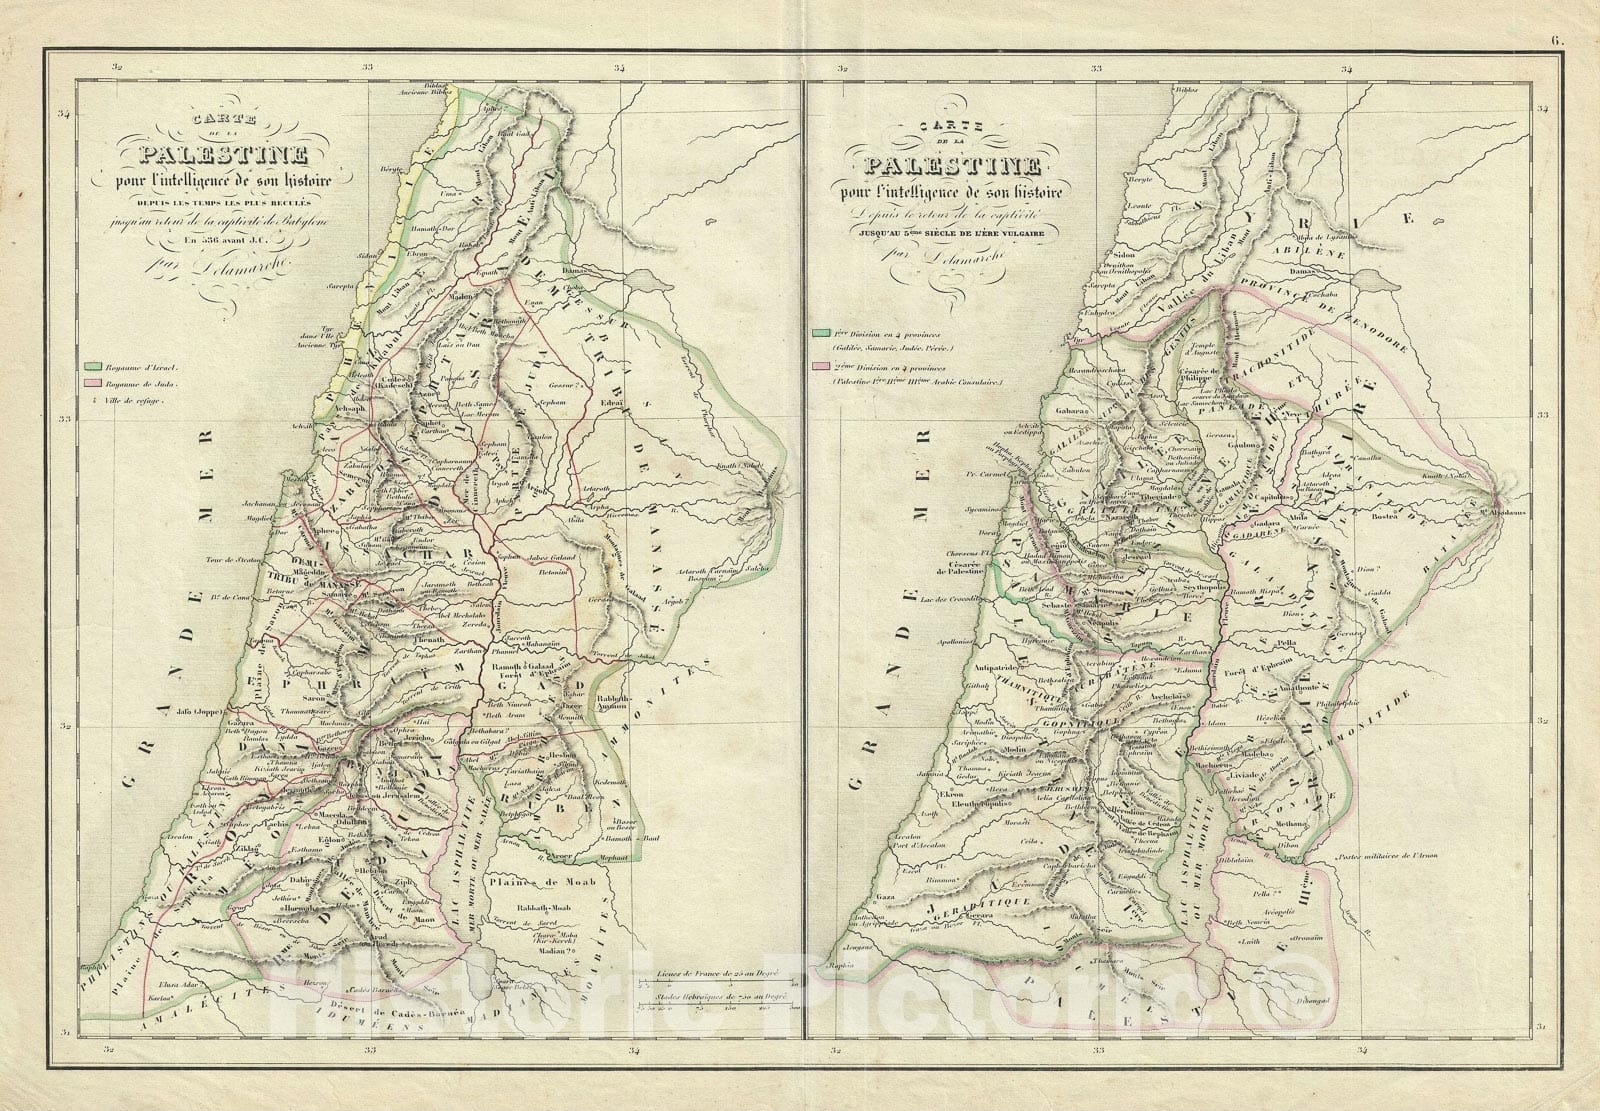 Historic Map : Palestine before and after Babylonian Exile, Delamarche, 1850, Vintage Wall Art